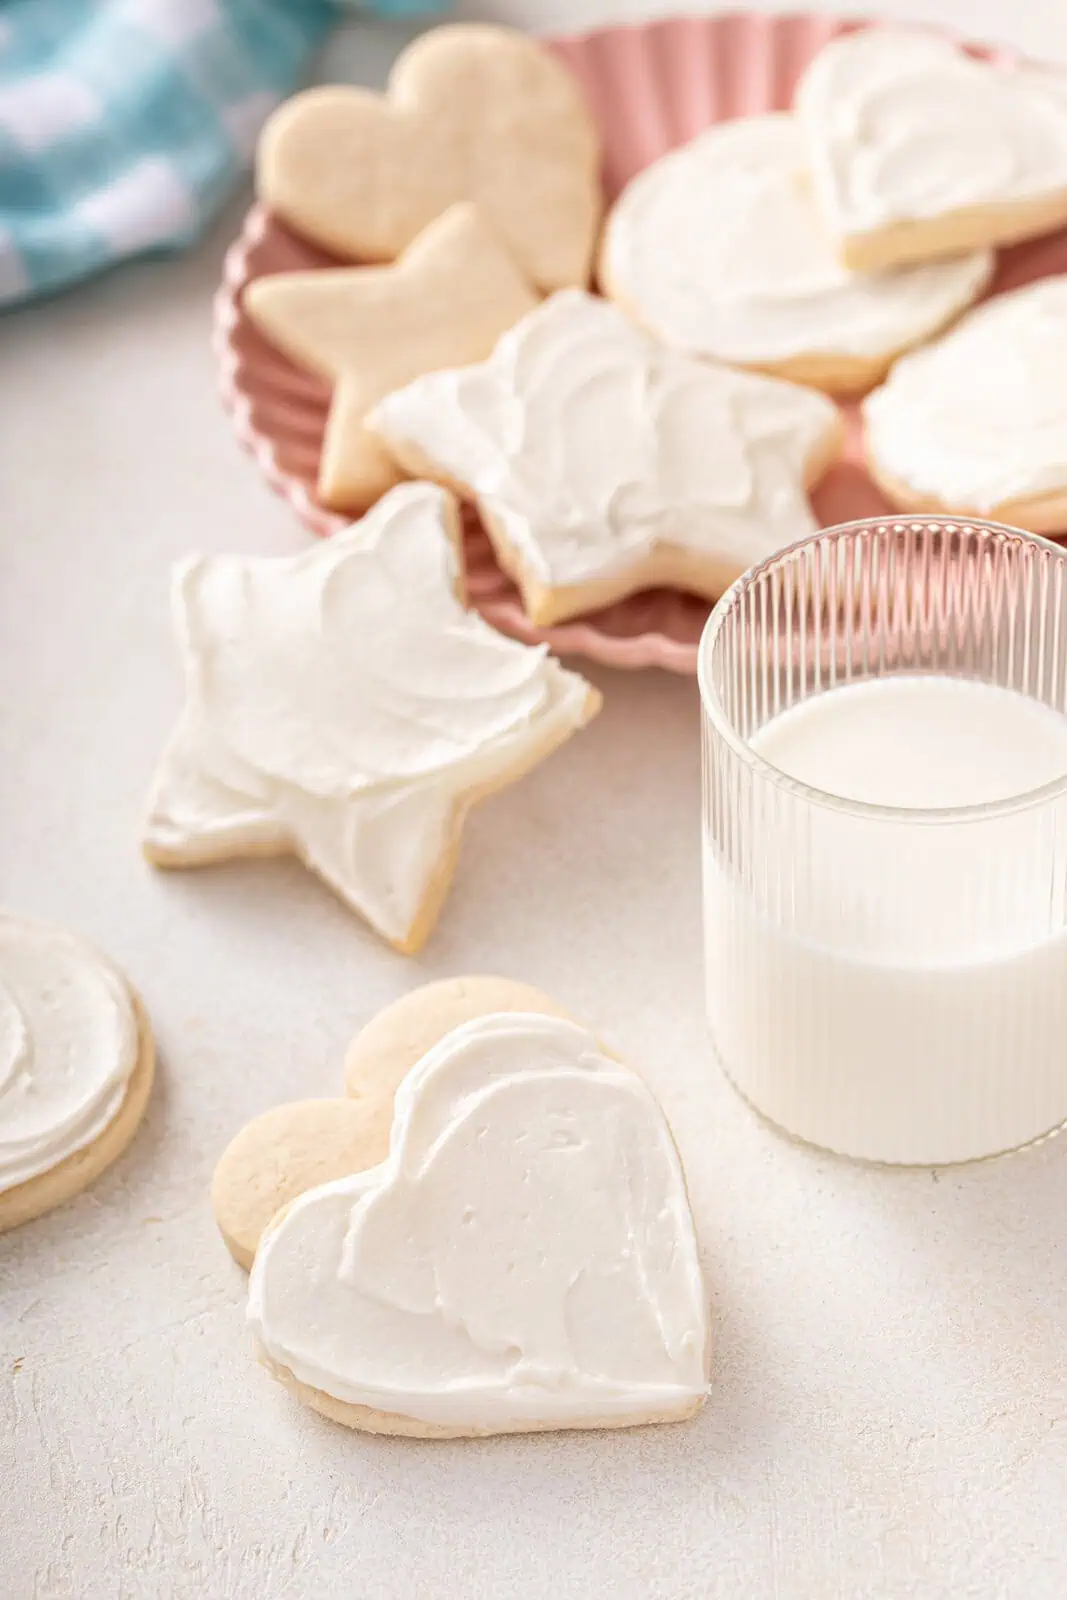 Several no chill sugar cookies scattered on a countertop next to a glass of milk.